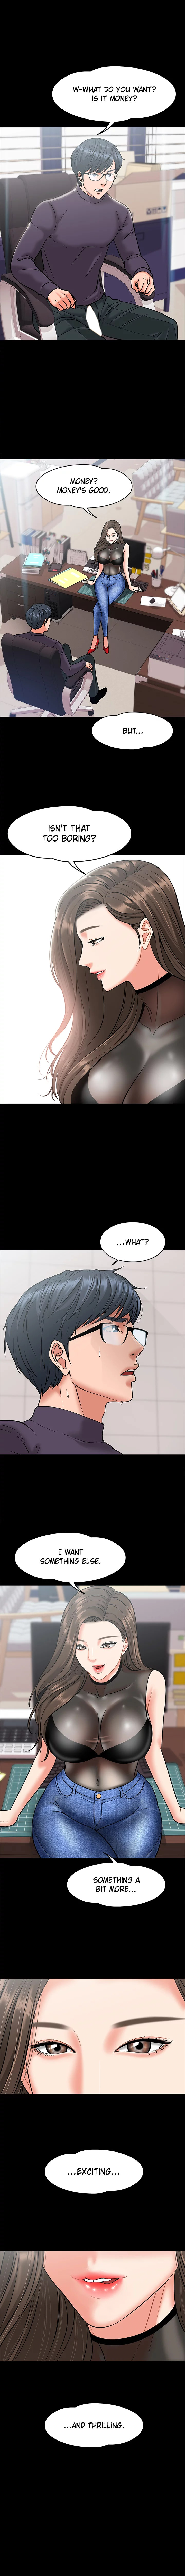 Are You Just Going To Watch? - Chapter 5 Page 4